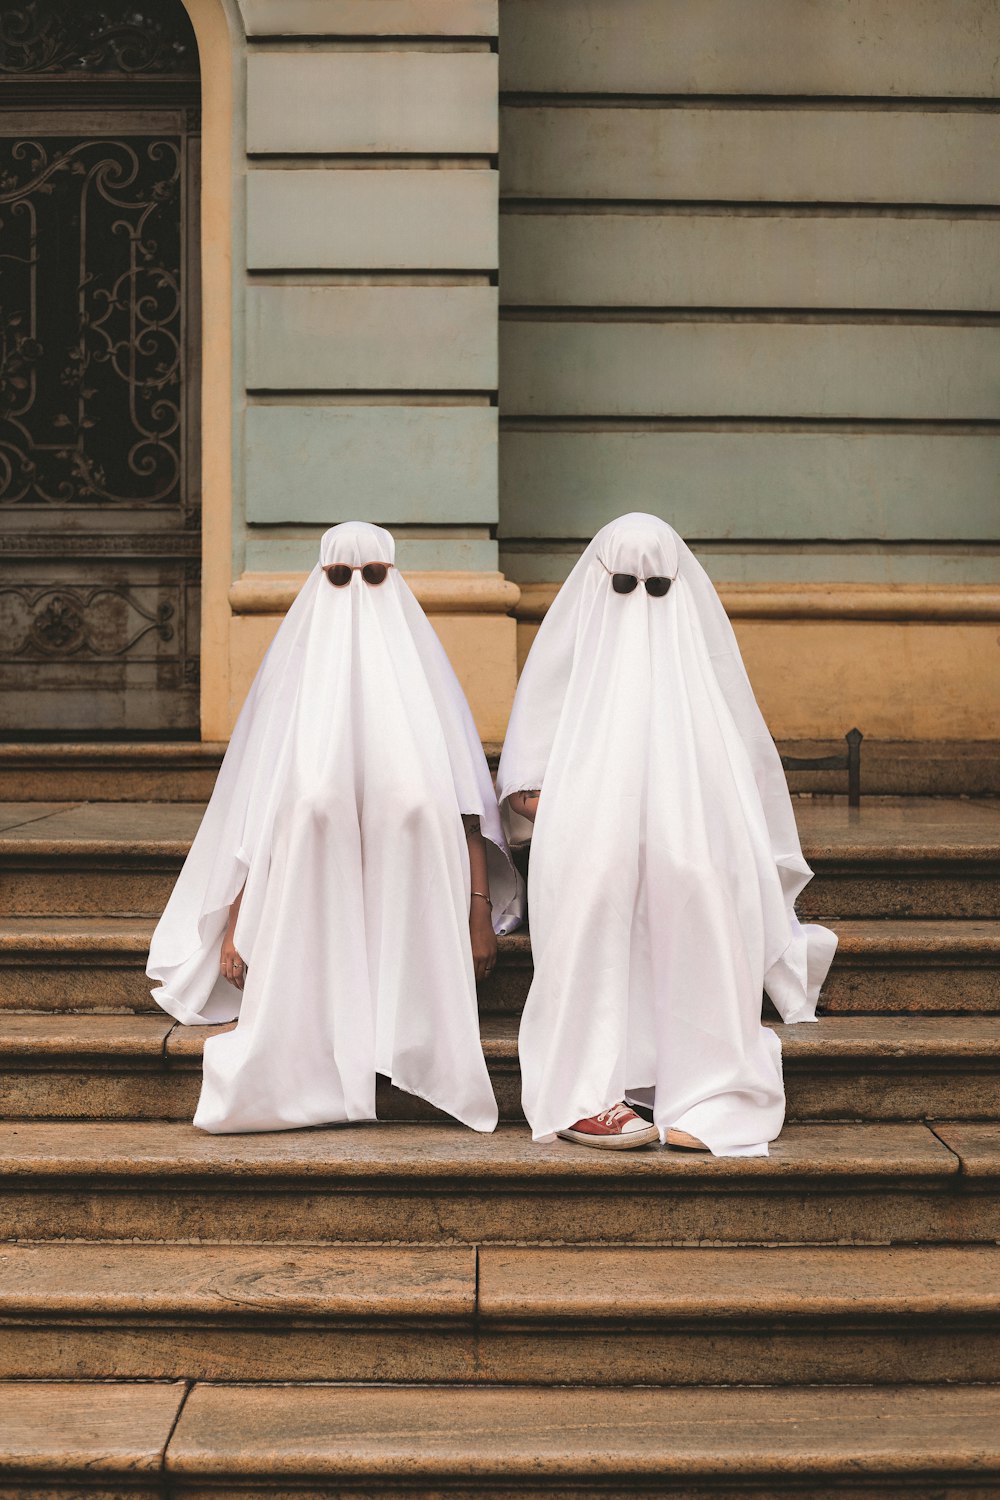 two people in white ghost costumes sitting on steps